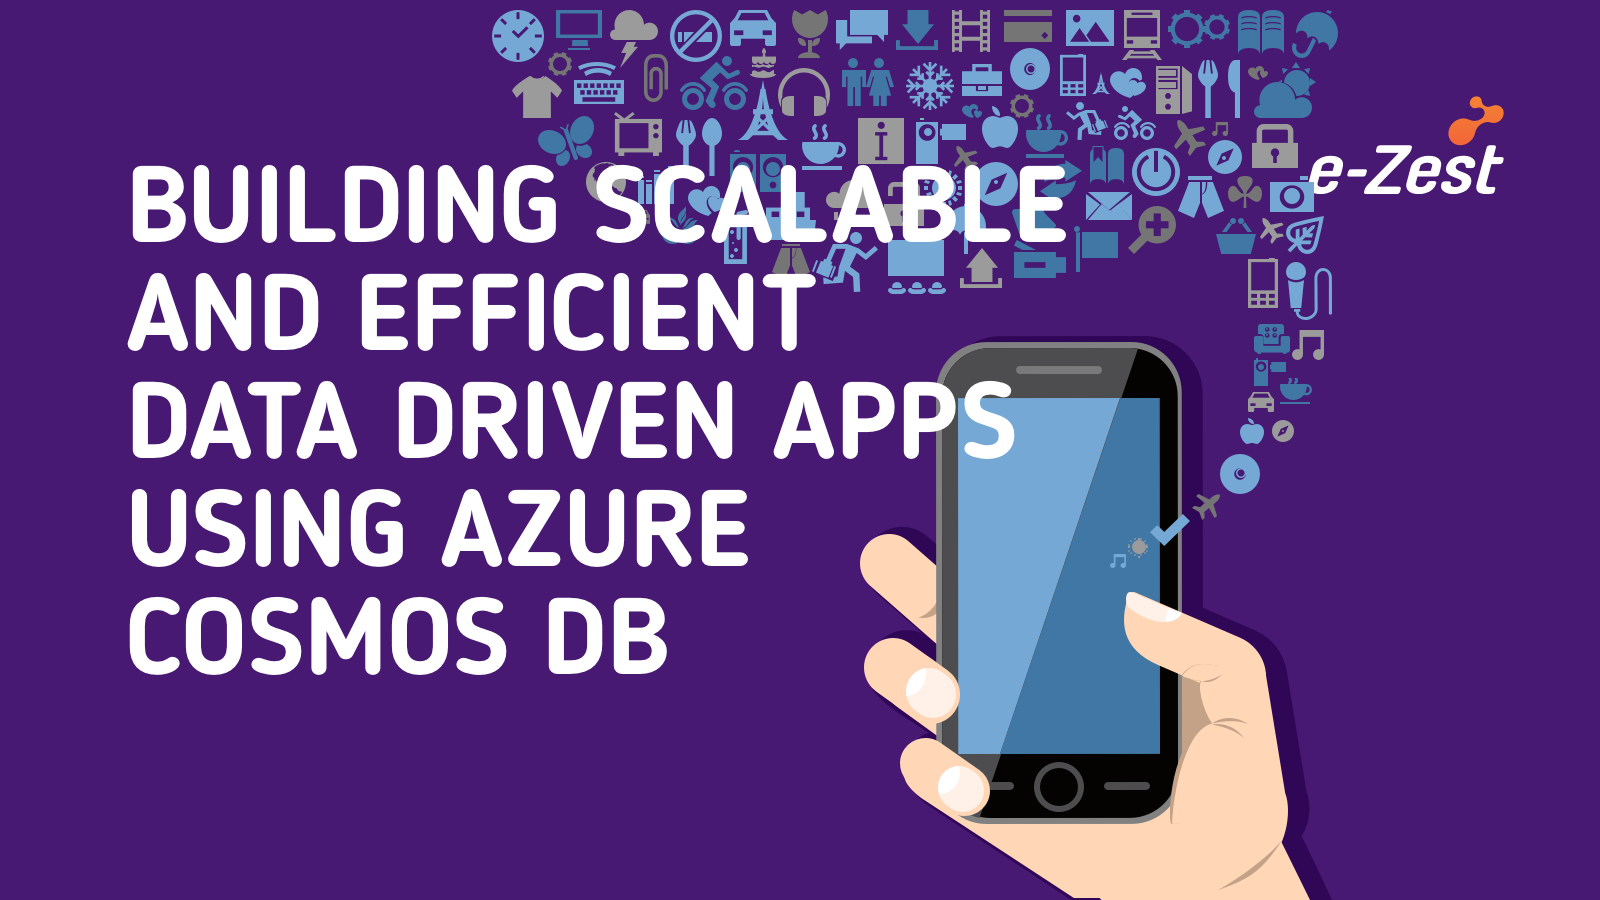 Building scalable and efficient data driven apps using Azure Cosmos DB